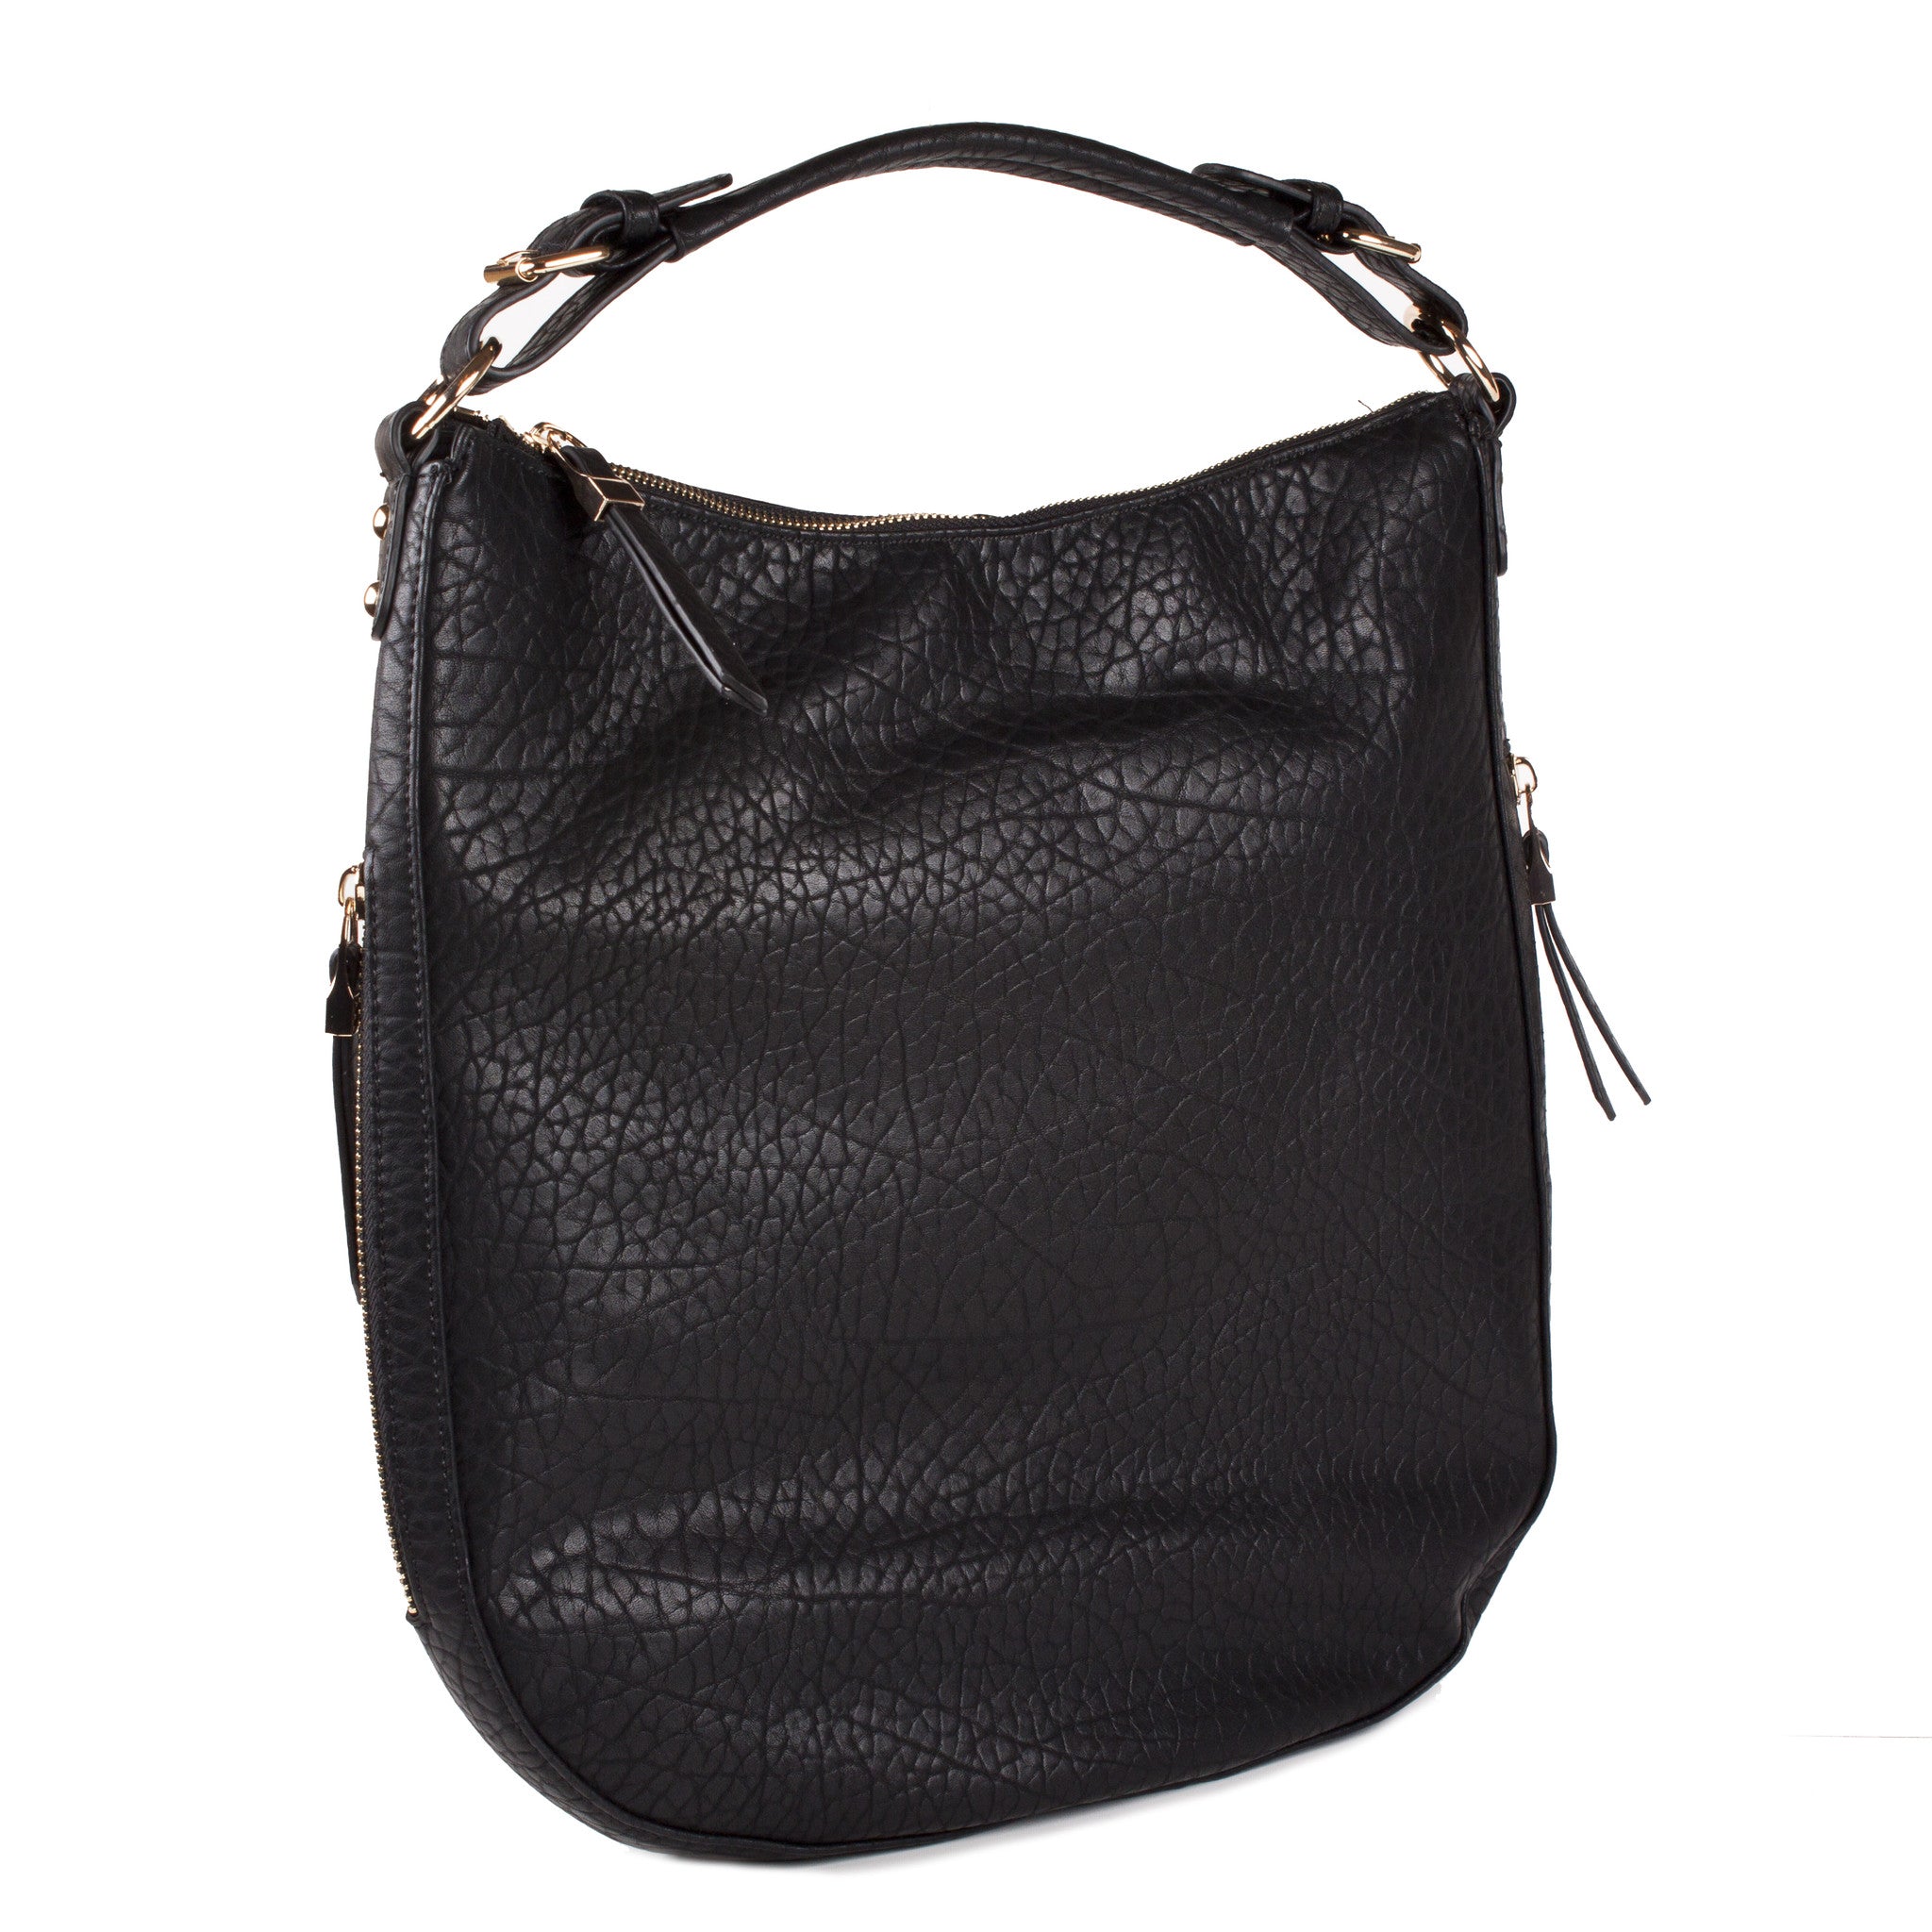 Moda Luxe Bag Multiple - $27 (55% Off Retail) - From Hailey